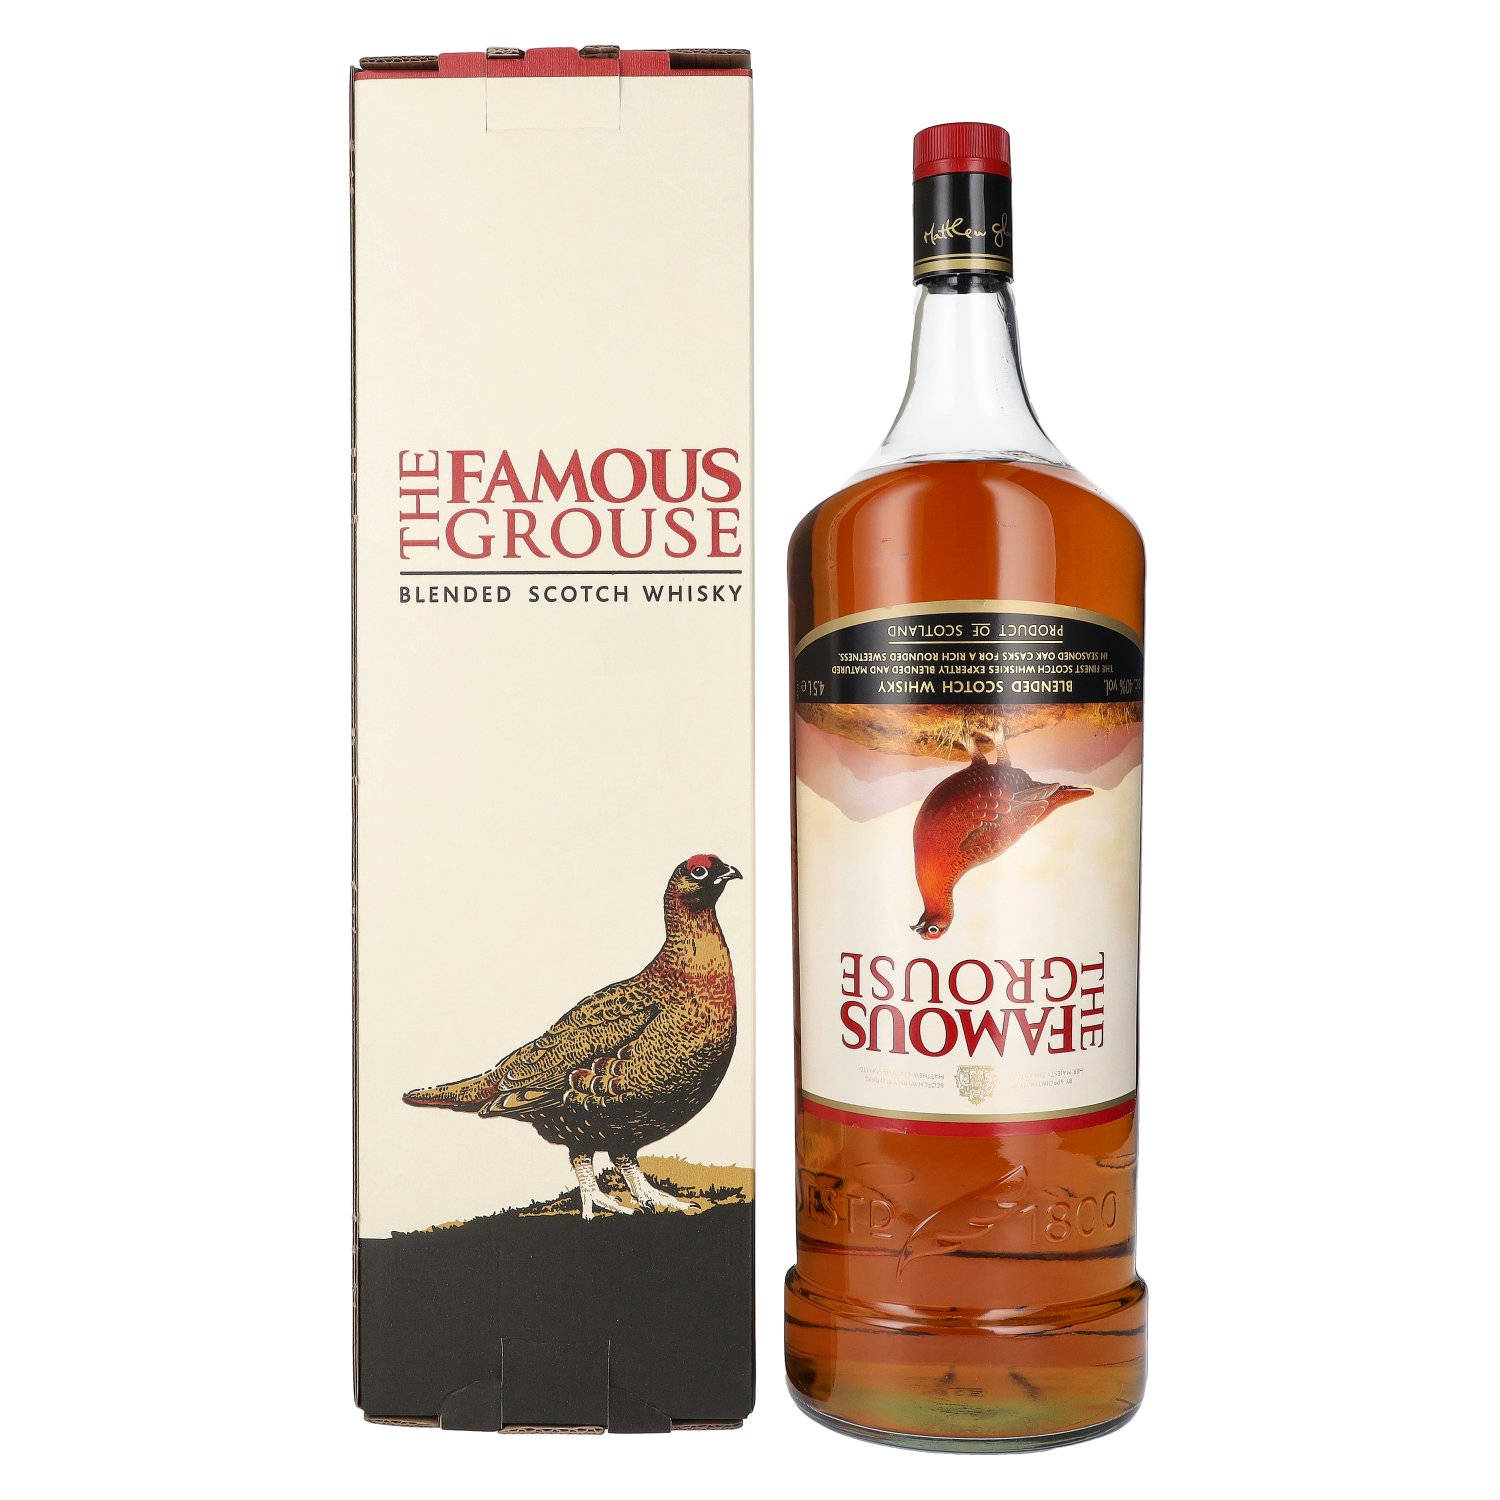 Caption: The iconic upside-down label of Famous Grouse whisky Wallpaper